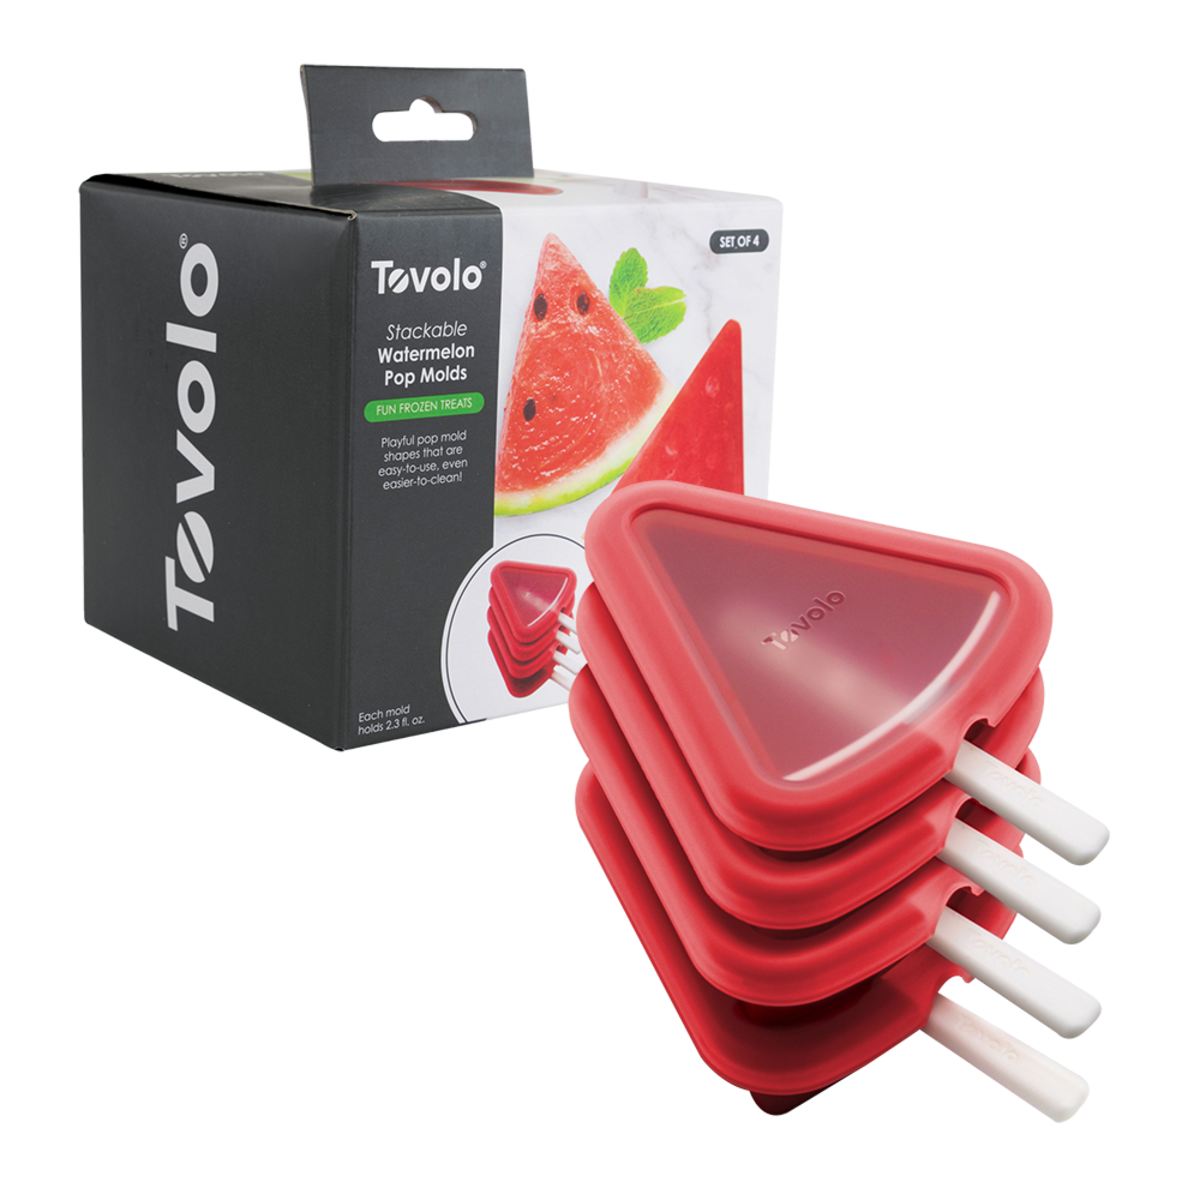 Tovolo Stackable Pop Moulds Set of 4 - Watermelon